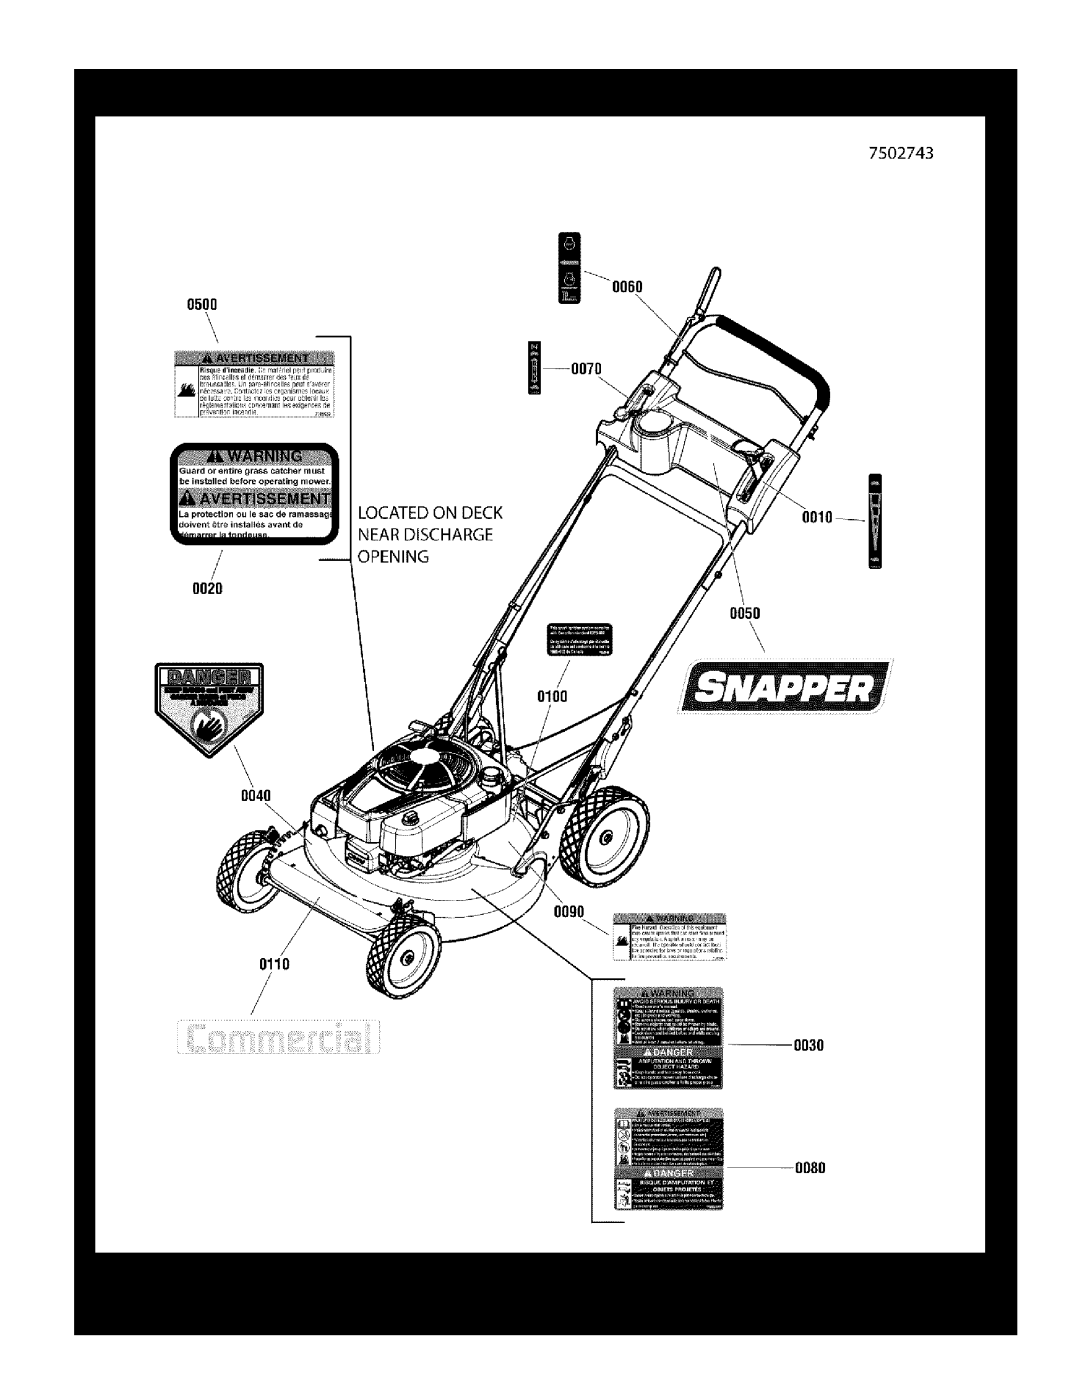 Briggs & Stratton 7800849 manual Decal Group, Reproduction, Manual No, 7106167, Steel Deck Walk Behind, Series 